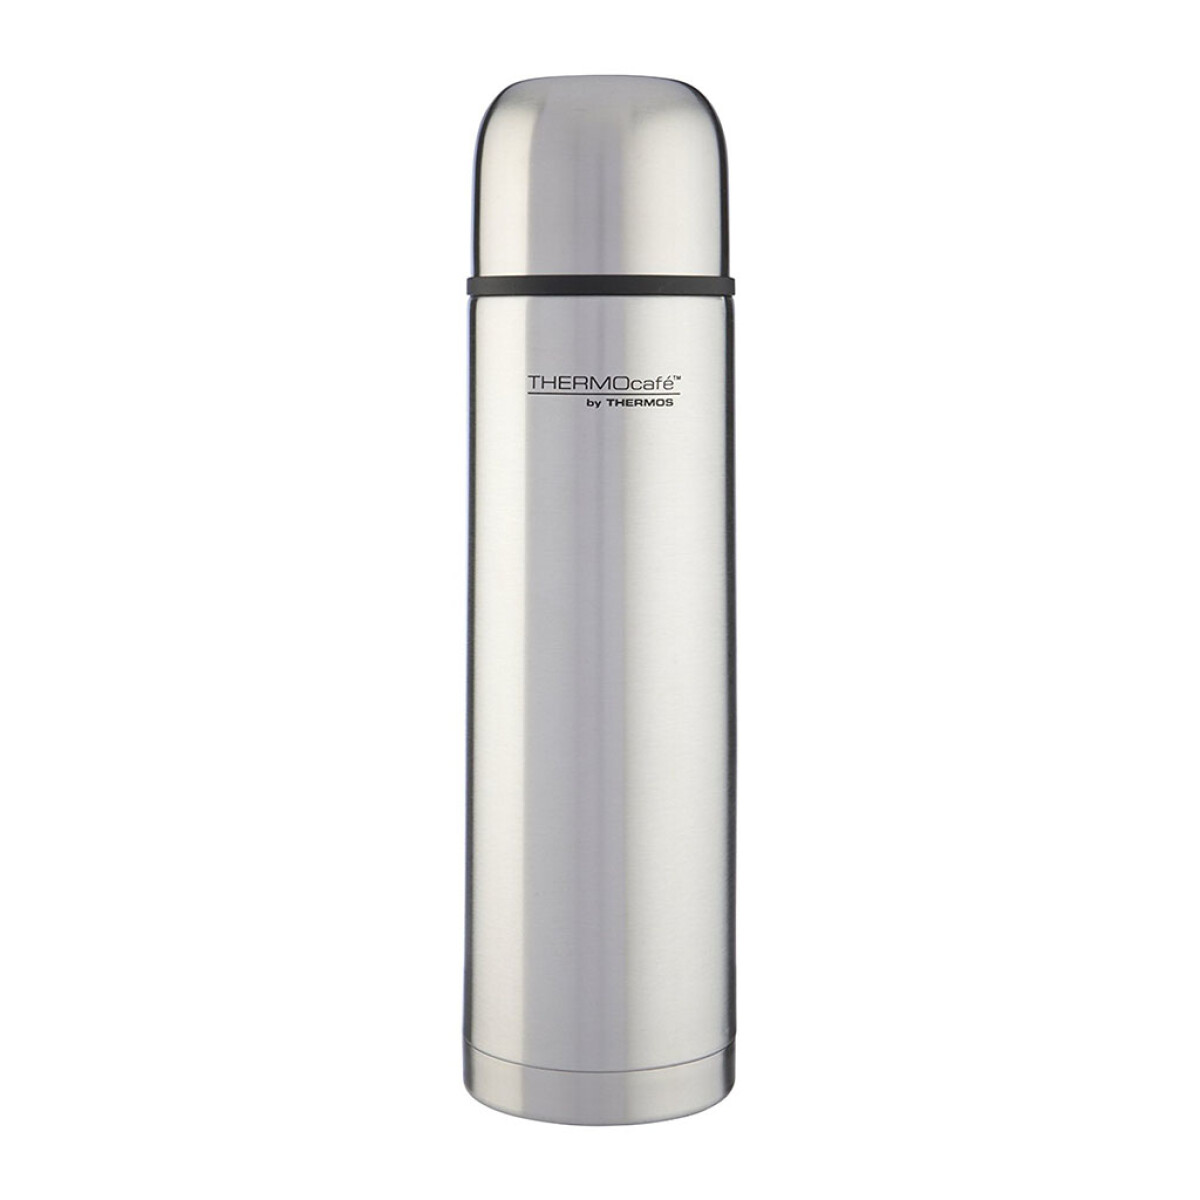 TERMO 1.0L EVERYDAY ACERO INOXIDABLE GRIS HAMMER THERMOS 